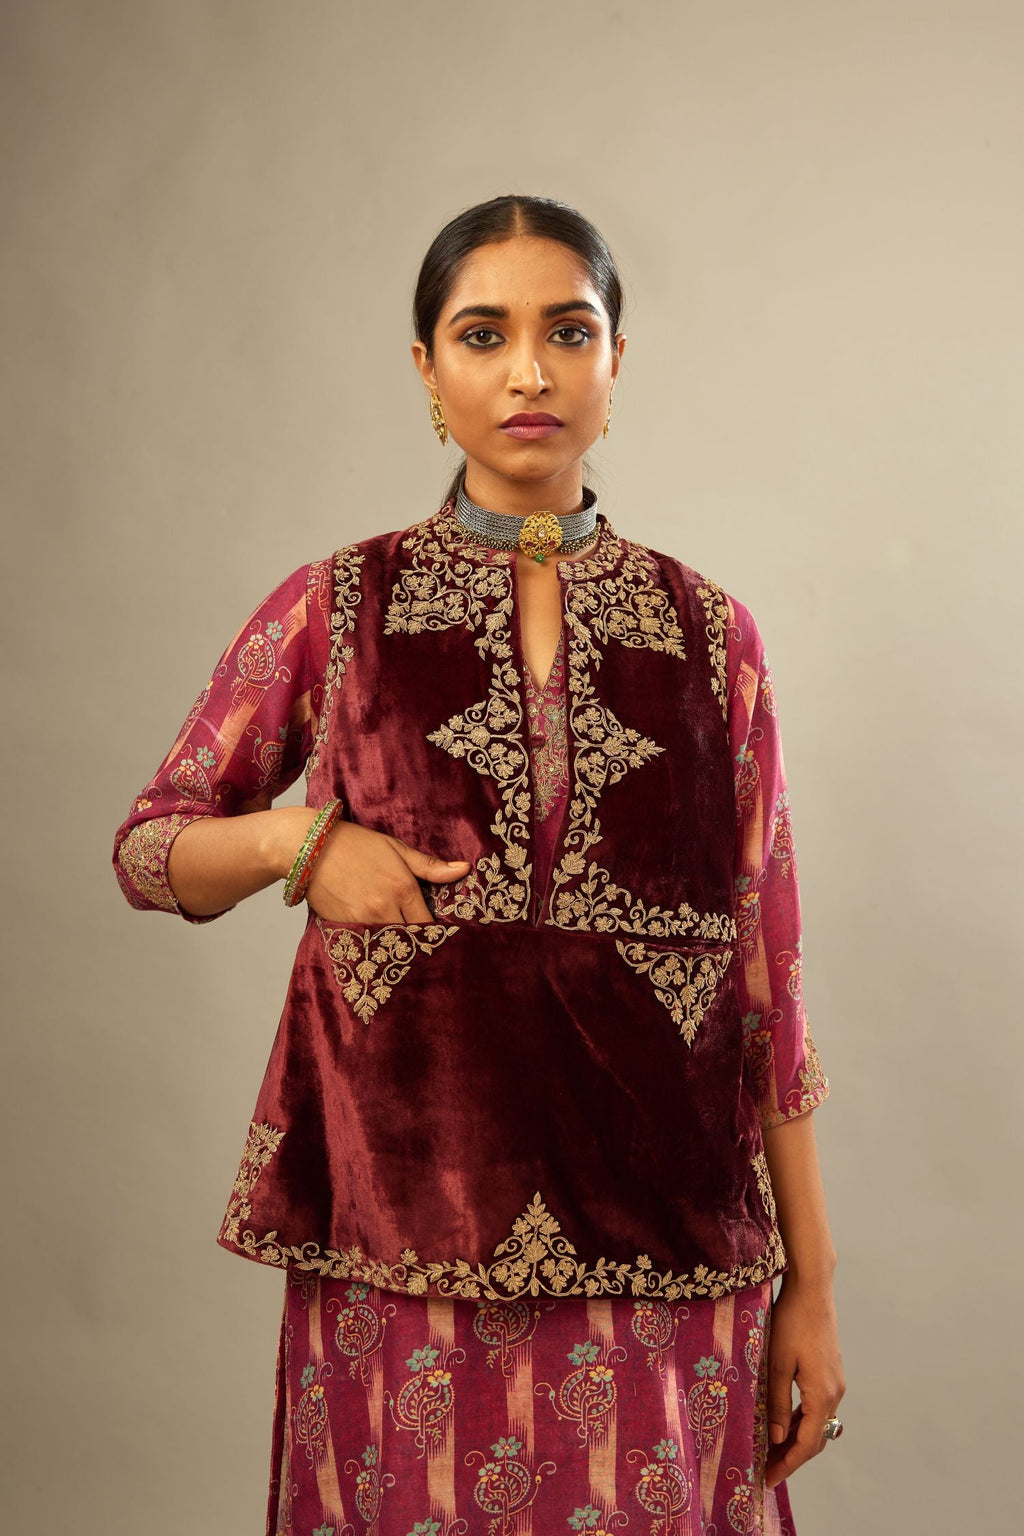 Maroon easy fit, short, sleeveless, silk-velvet jacket, embellished with antique gold embroidery.